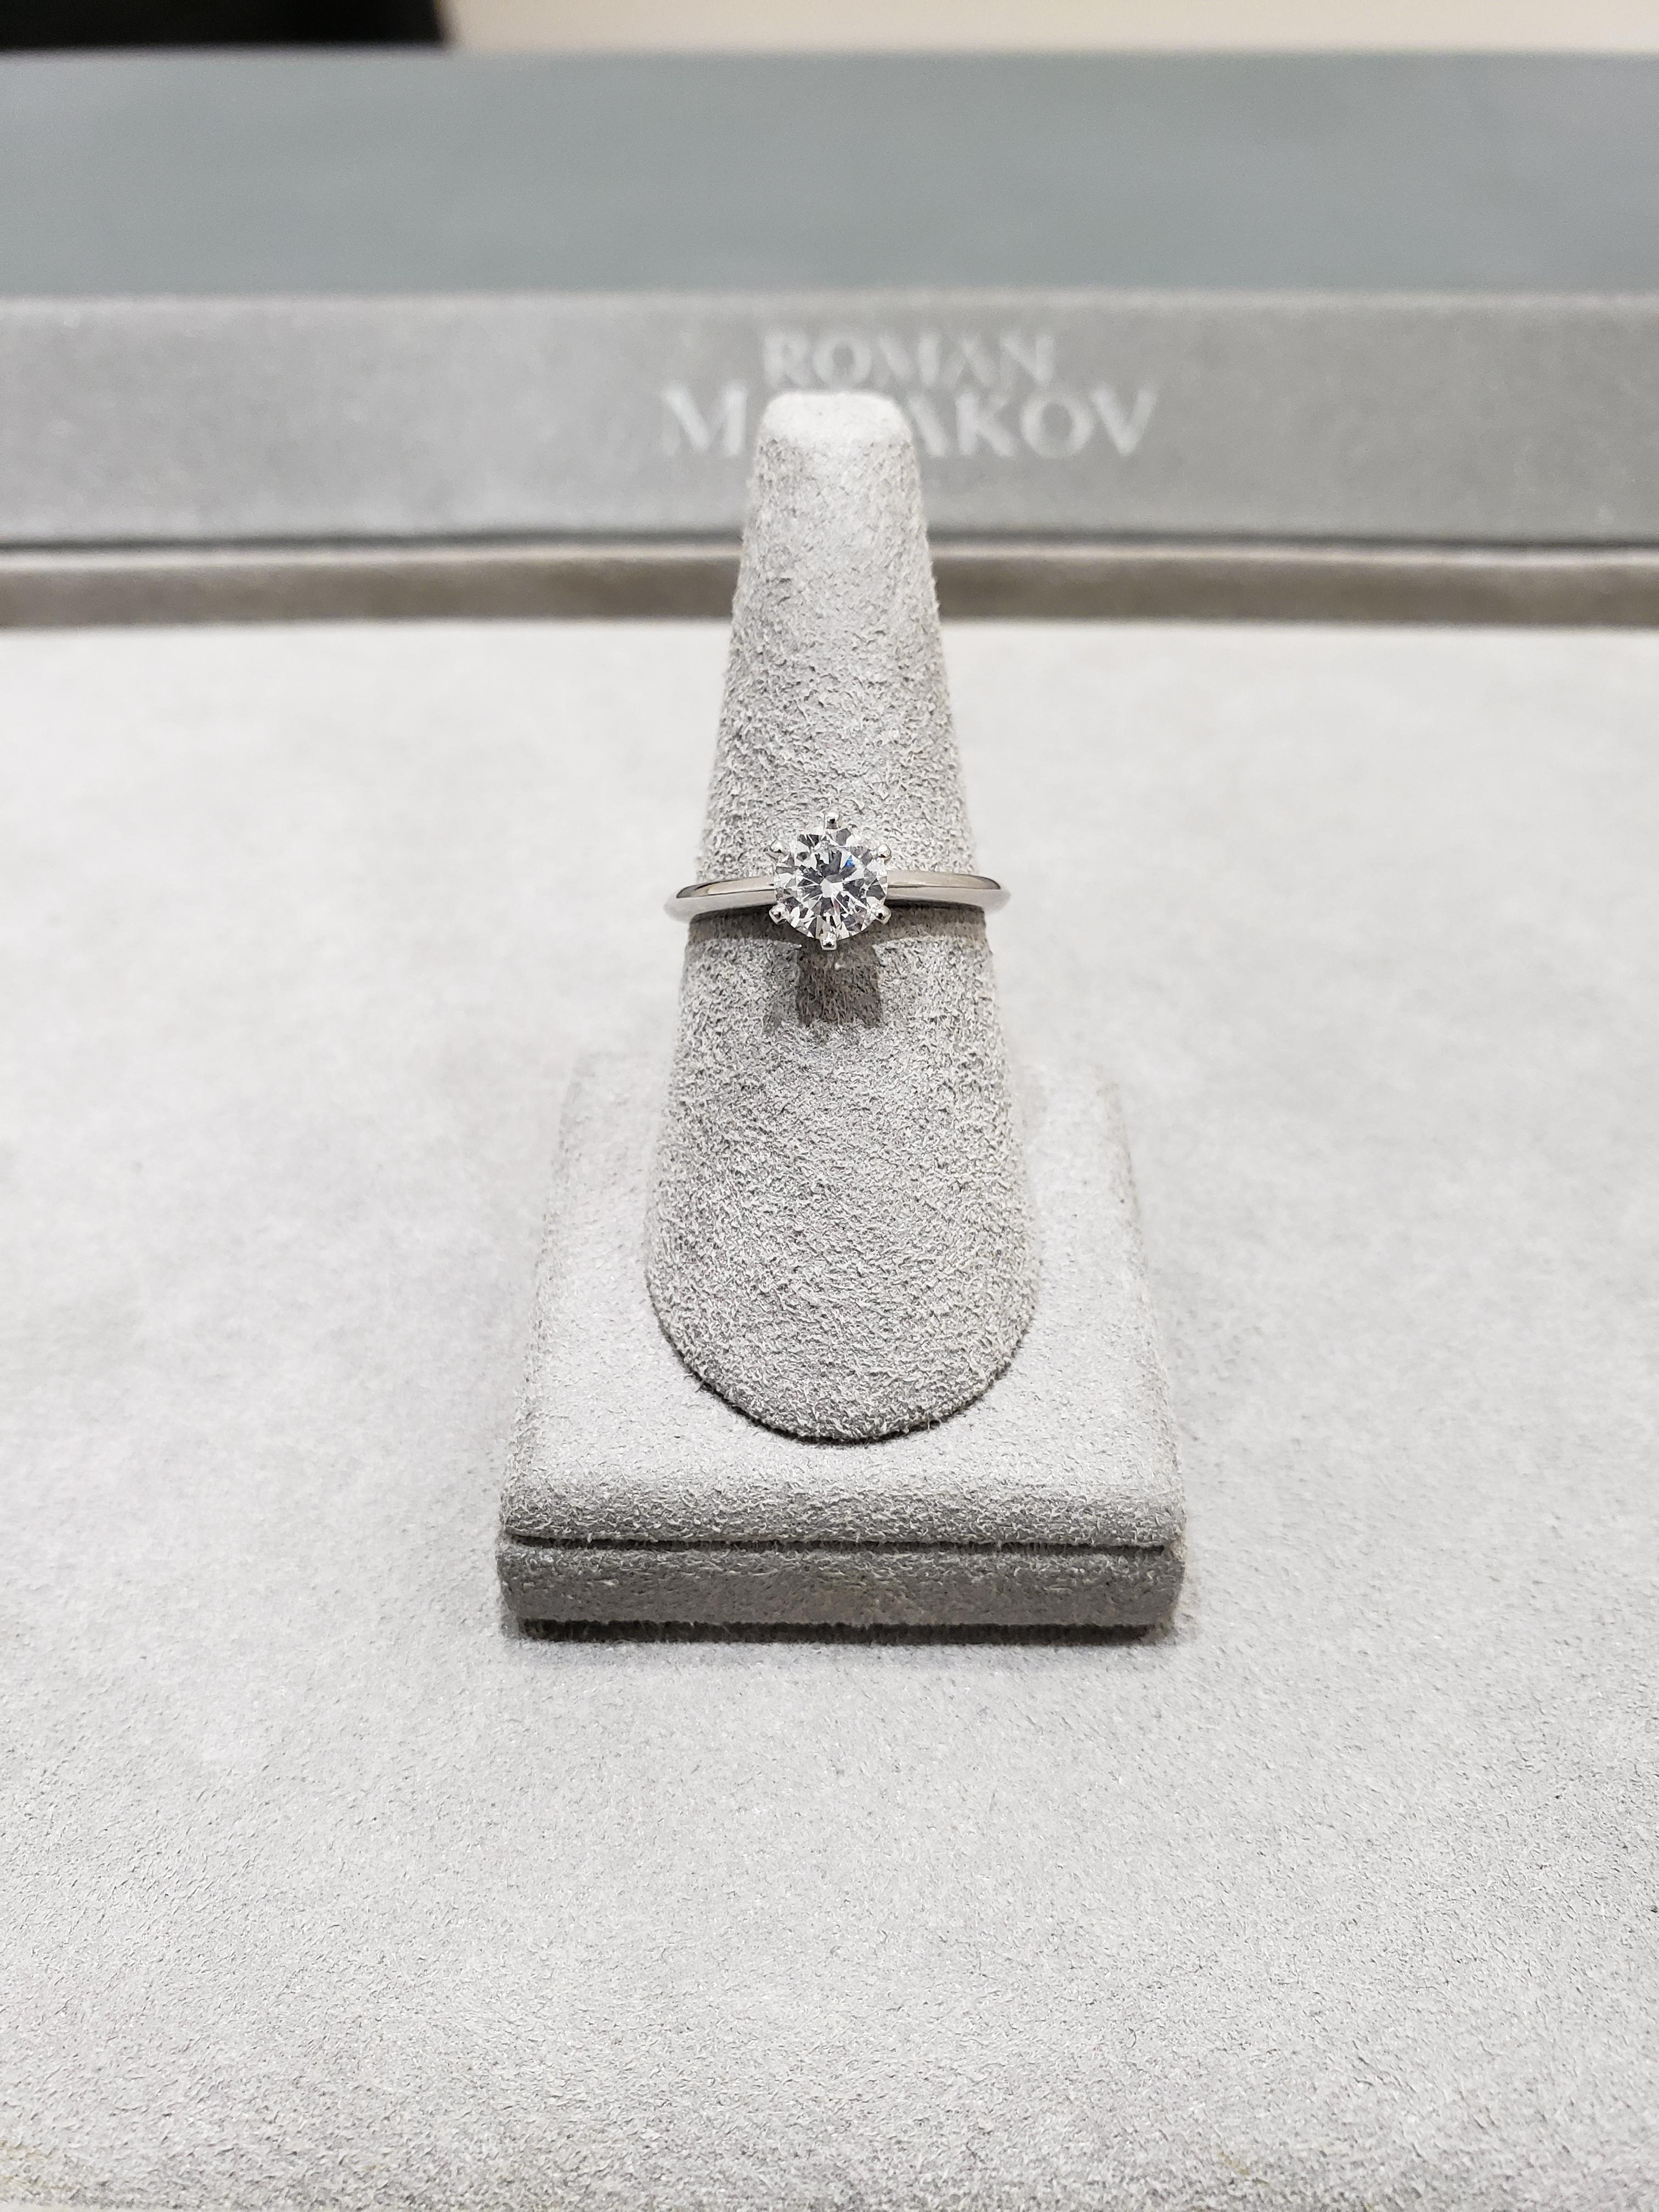 Features a 0.70 carat round diamond, certified by GIA as G color, SI1 clarity. Set in a 6 prong knife-edge style band made in platinum. Approximately size 6 US (sizable upon request).

Style available in different price ranges. Prices are based on